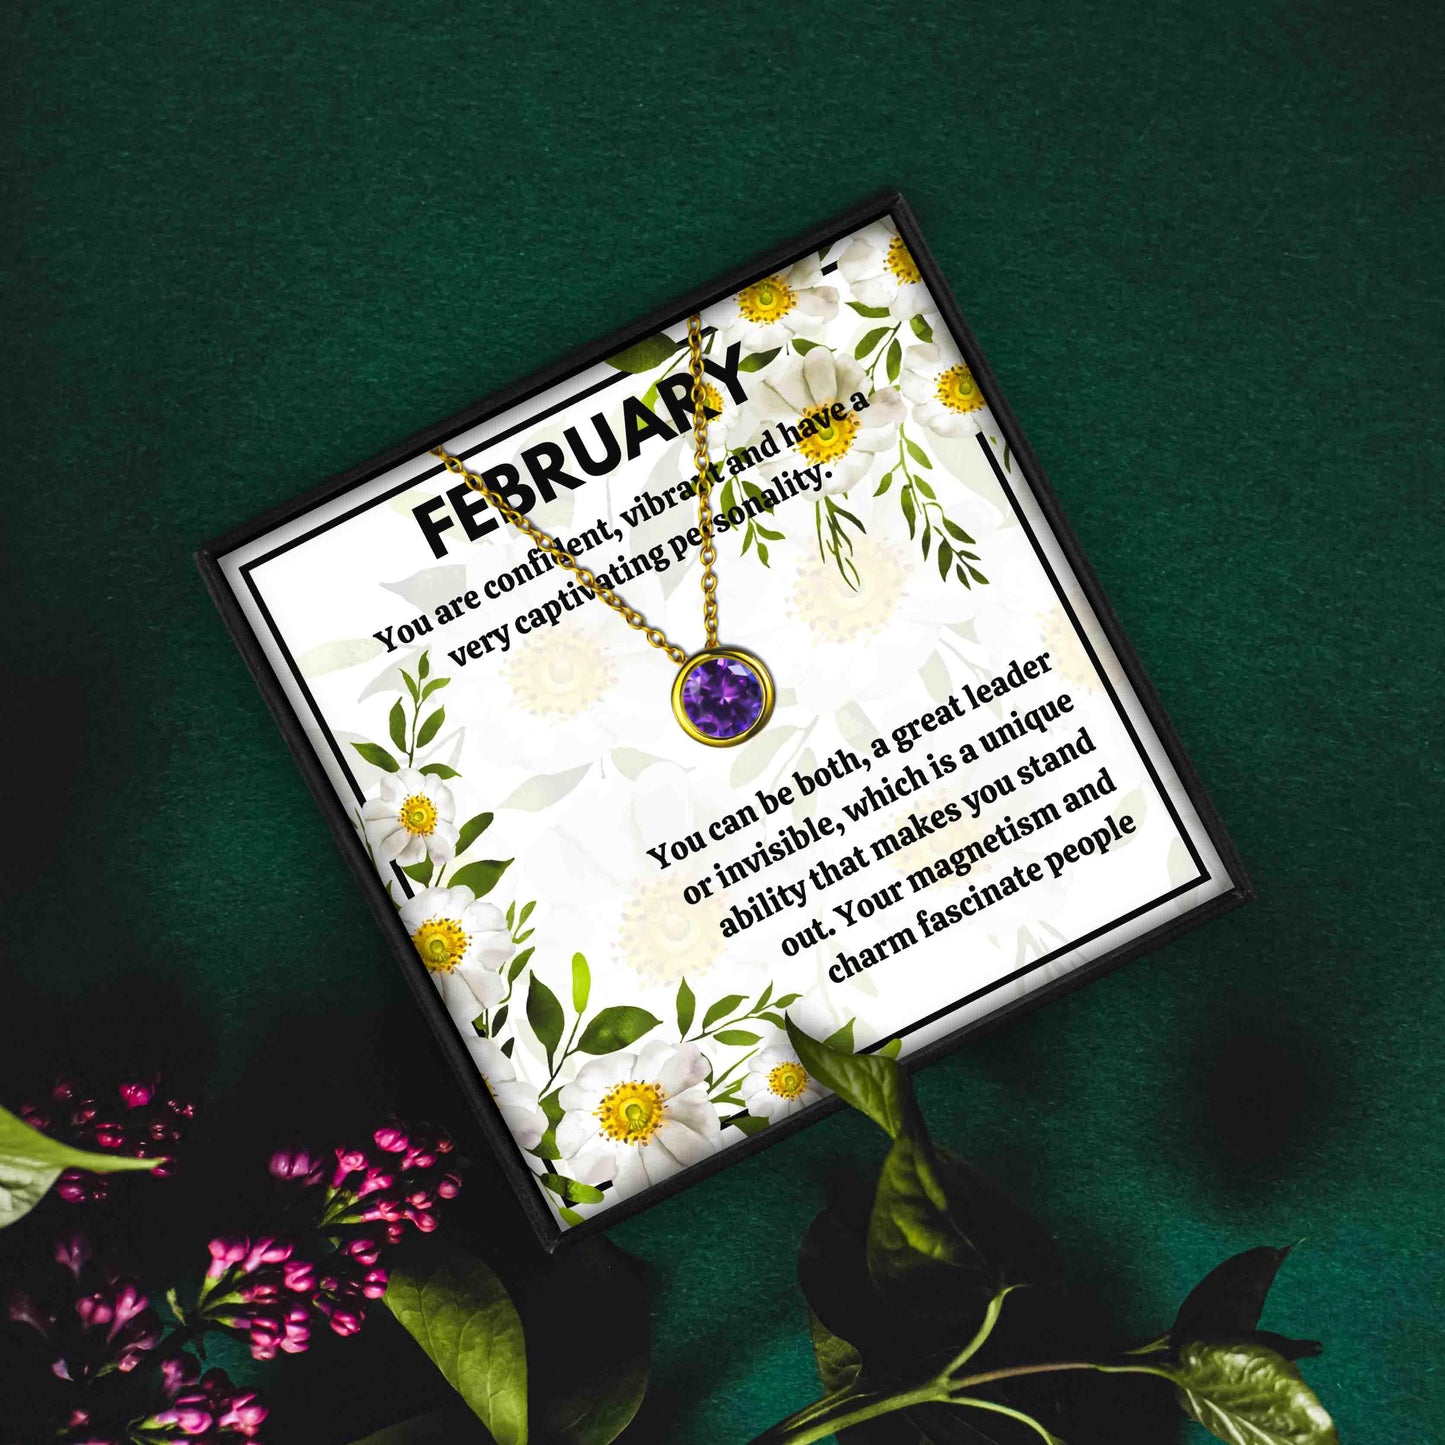 Meaningful February Birthstone Necklace Gift Set in 2023 | Meaningful February Birthstone Necklace Gift Set - undefined | feb birthstone, february birthstone color, February birthstone necklace, february gemstone | From Hunny Life | hunnylife.com